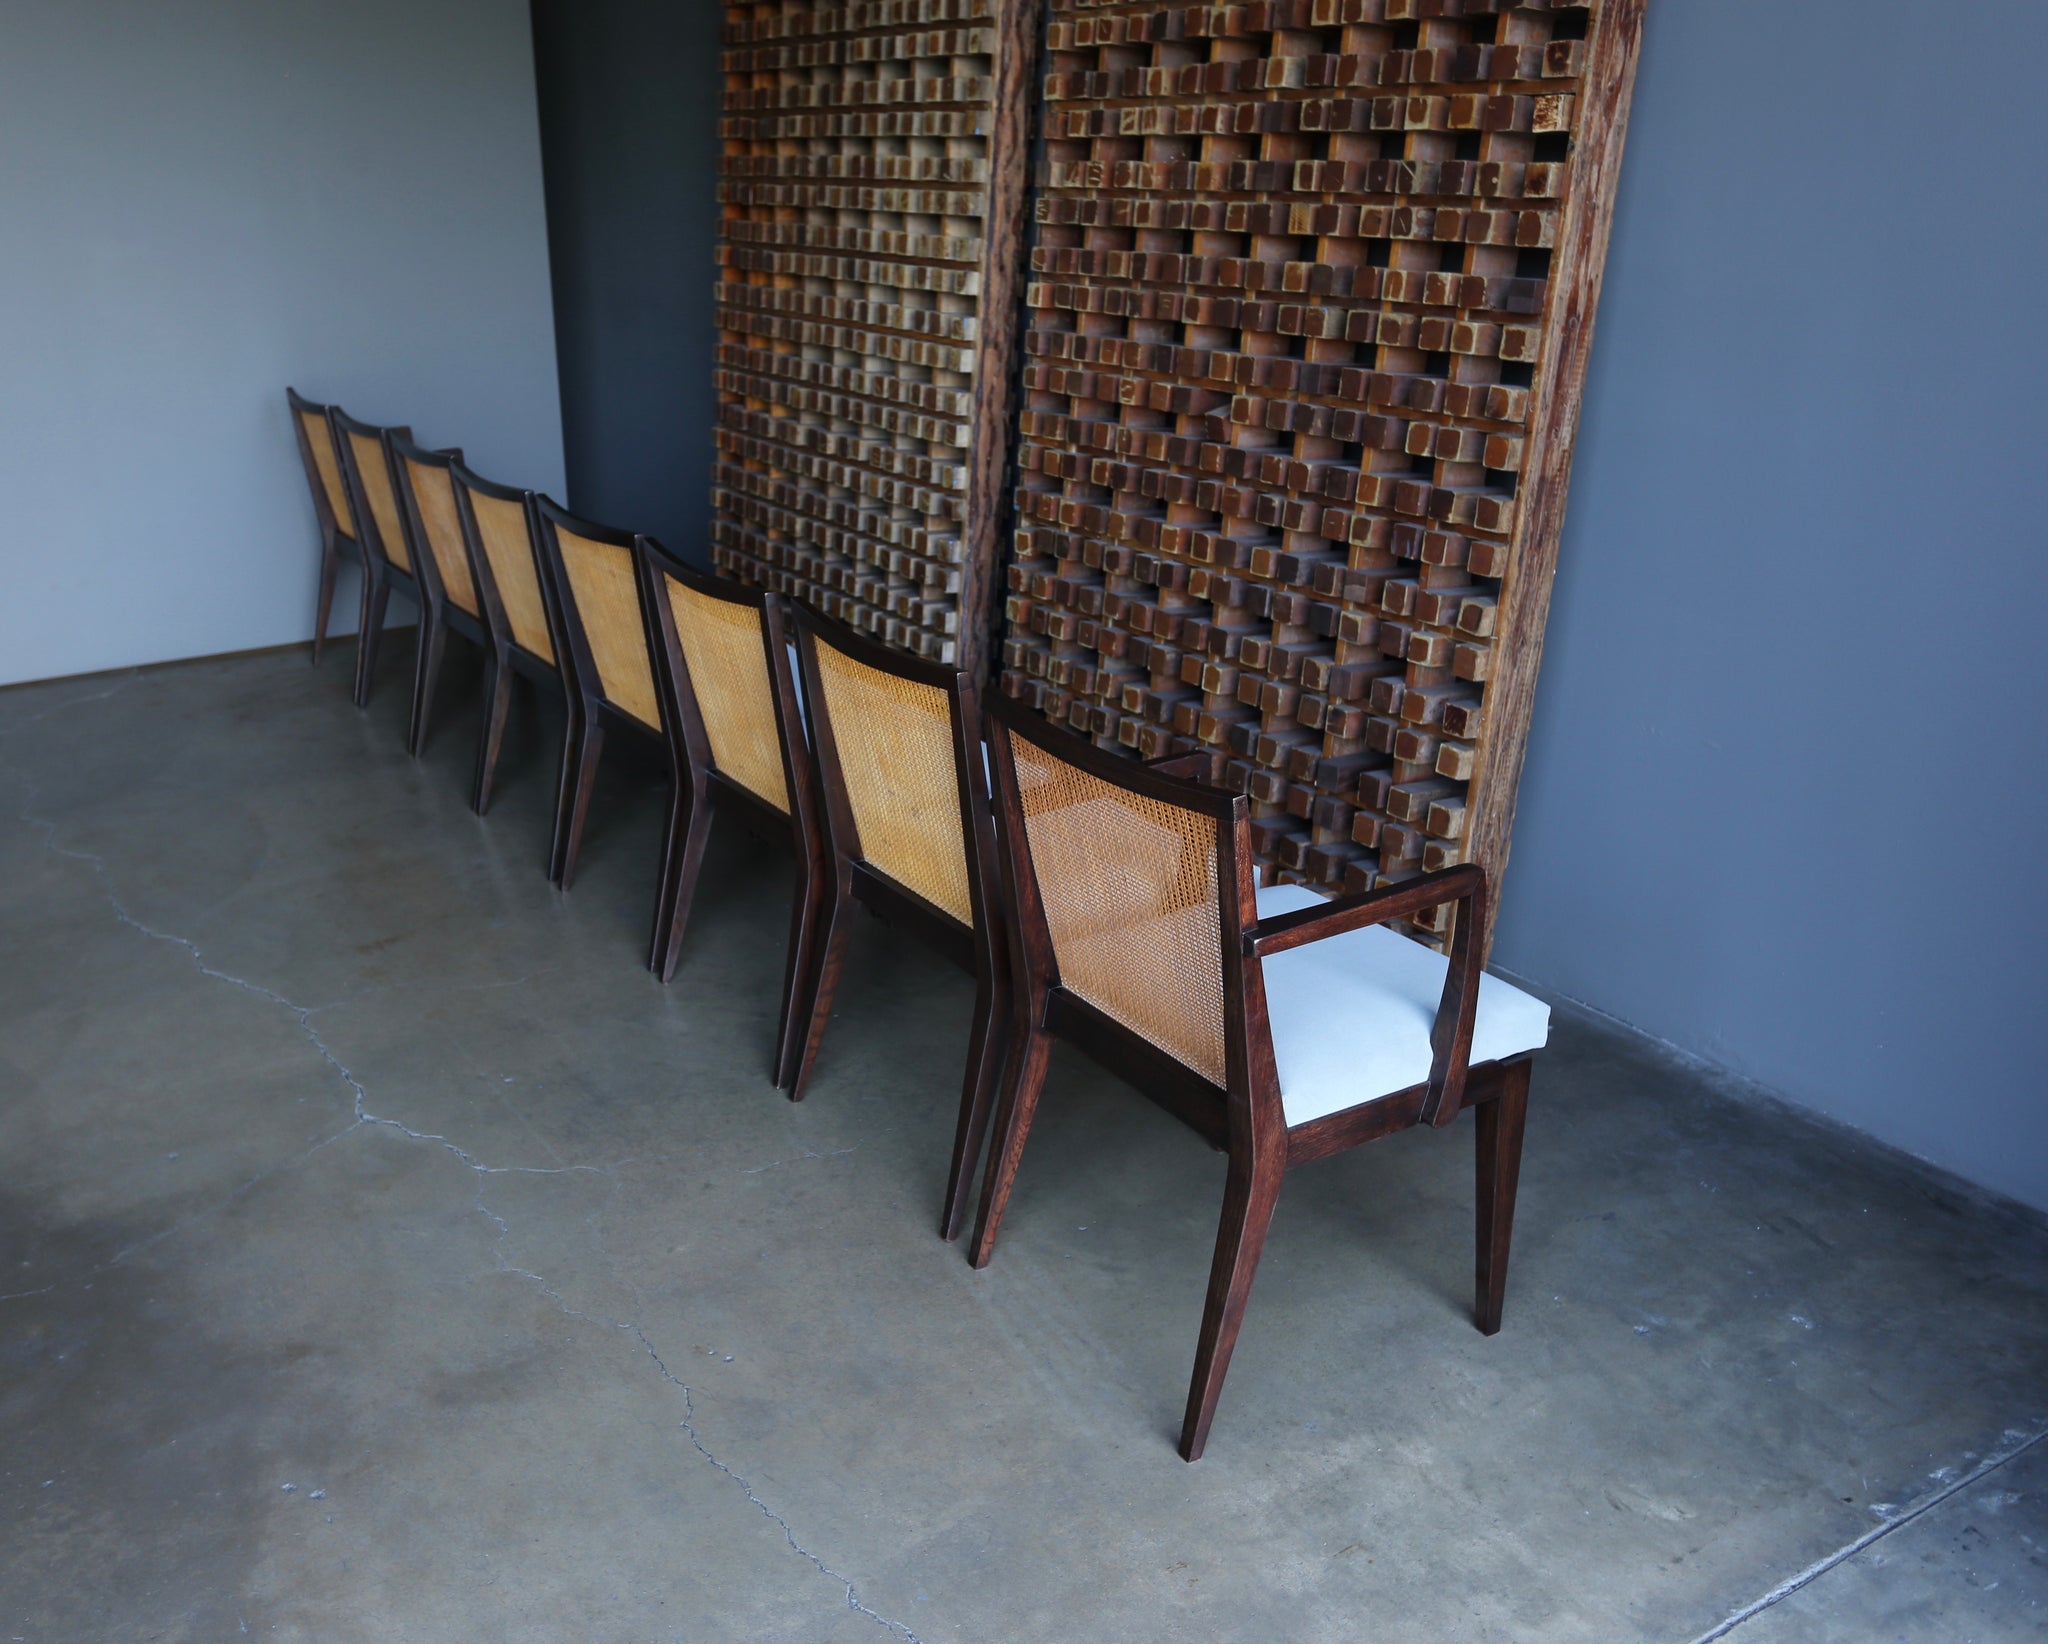 = SOLD = Edward Wormley Set of Eight Caned Dining Chairs for Dunbar, circa 1955